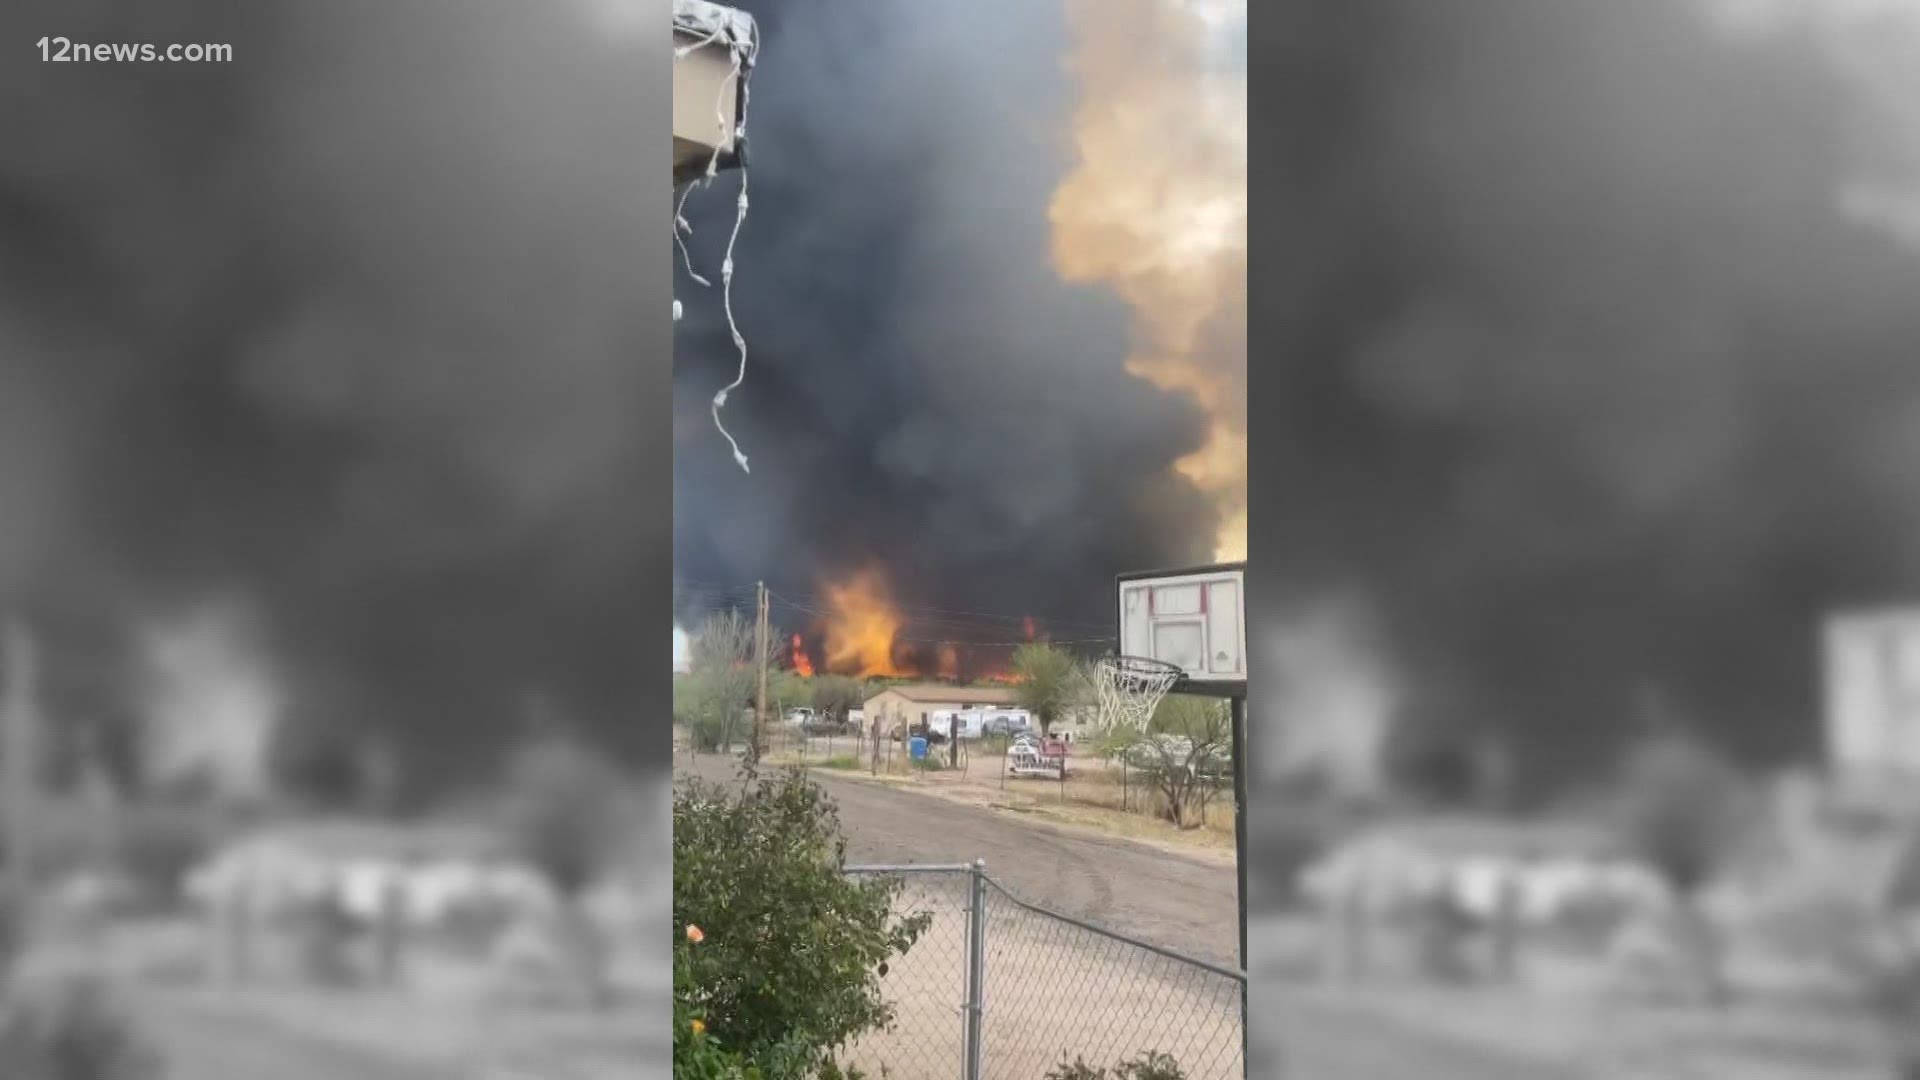 The Margo Fire is burning near the town of Dudleyville in Pinal County. 150 acres have already burned. All residents have been told to evacuate.